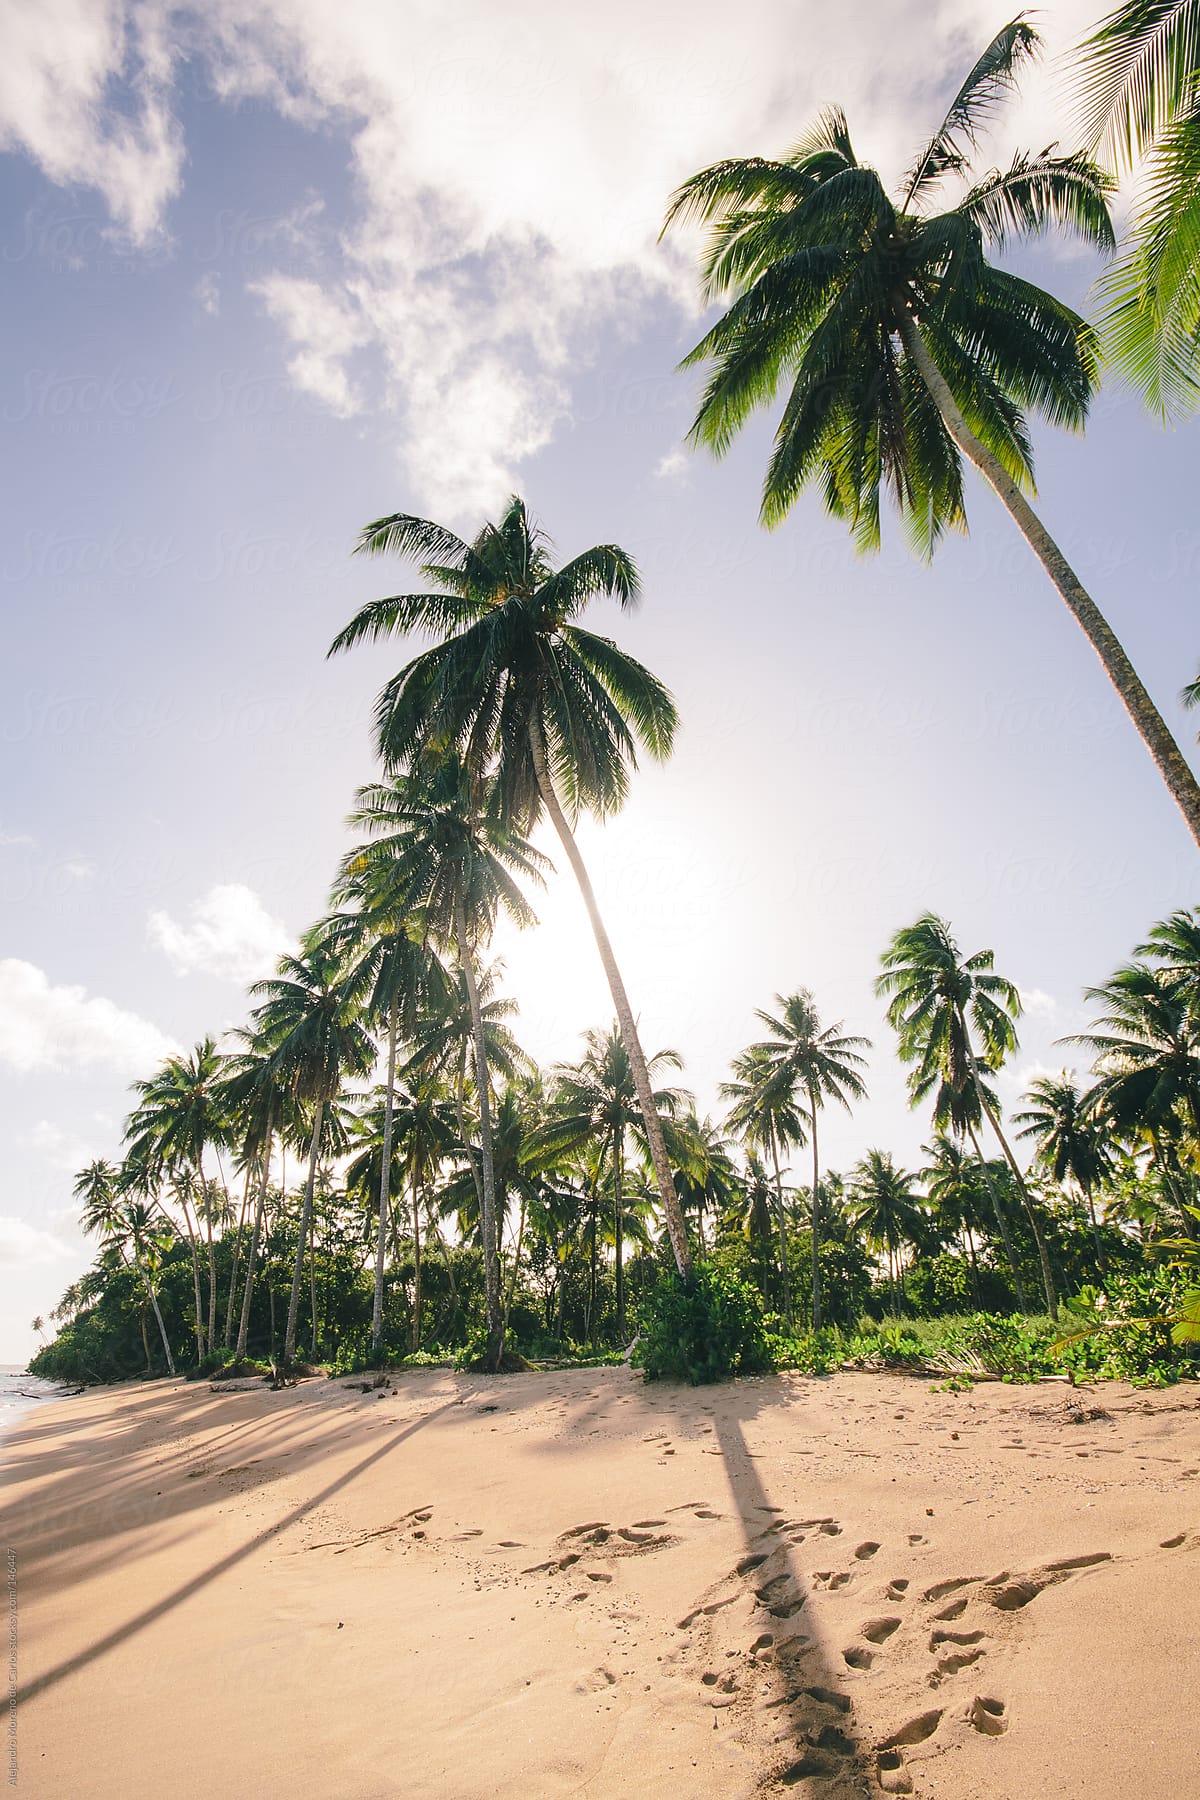 Beach And Palm Trees On Tropical Exotic Island By Stocksy Contributor Alejandro Moreno De